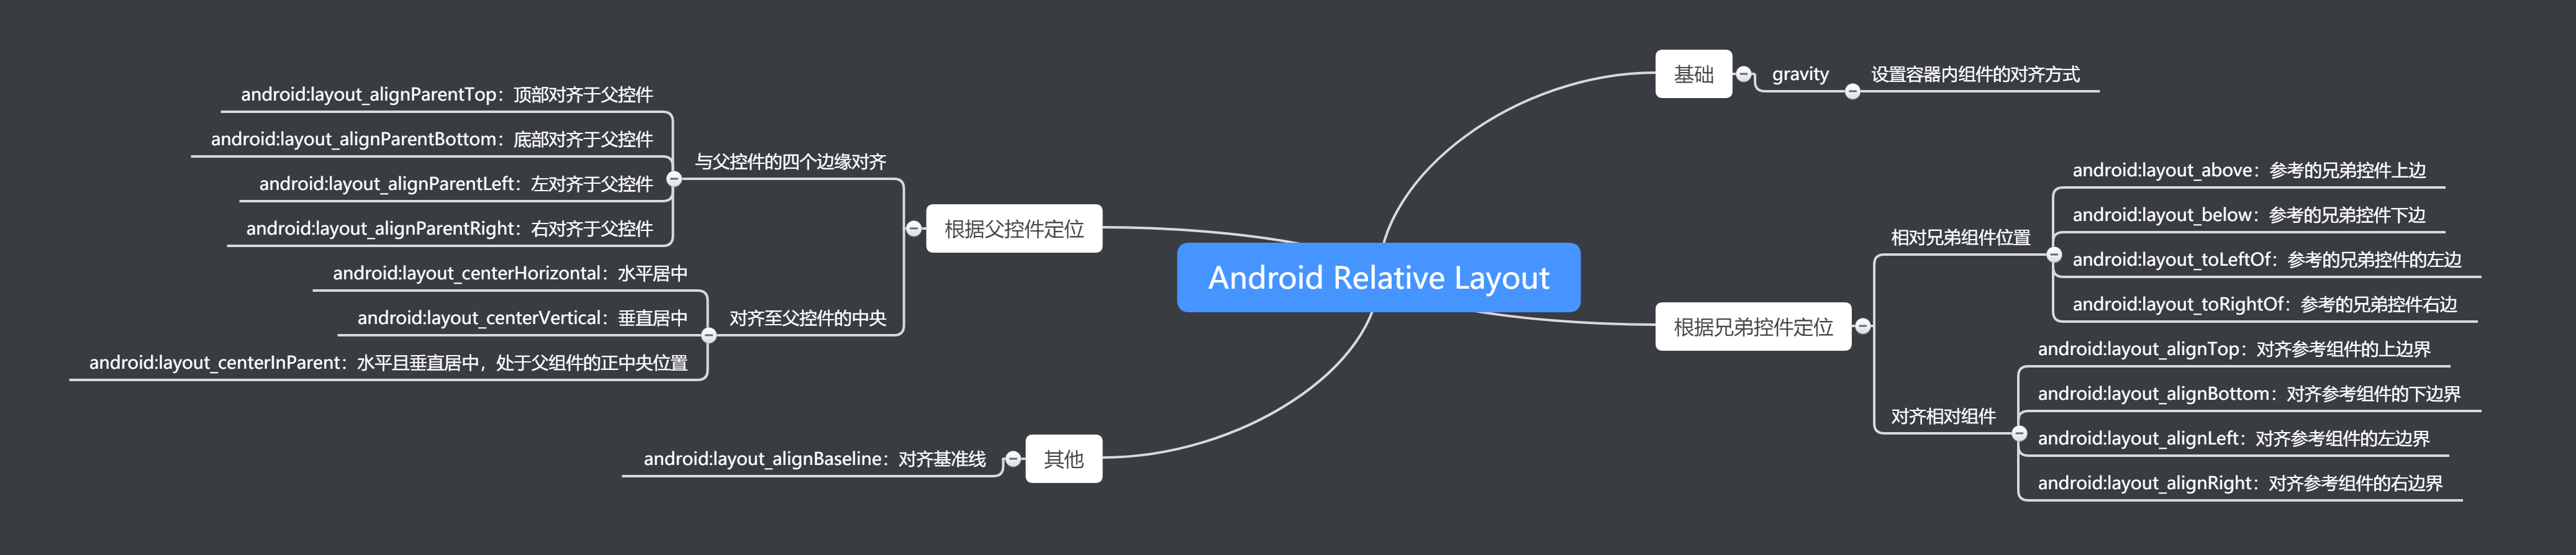 Android Relative Layout.png